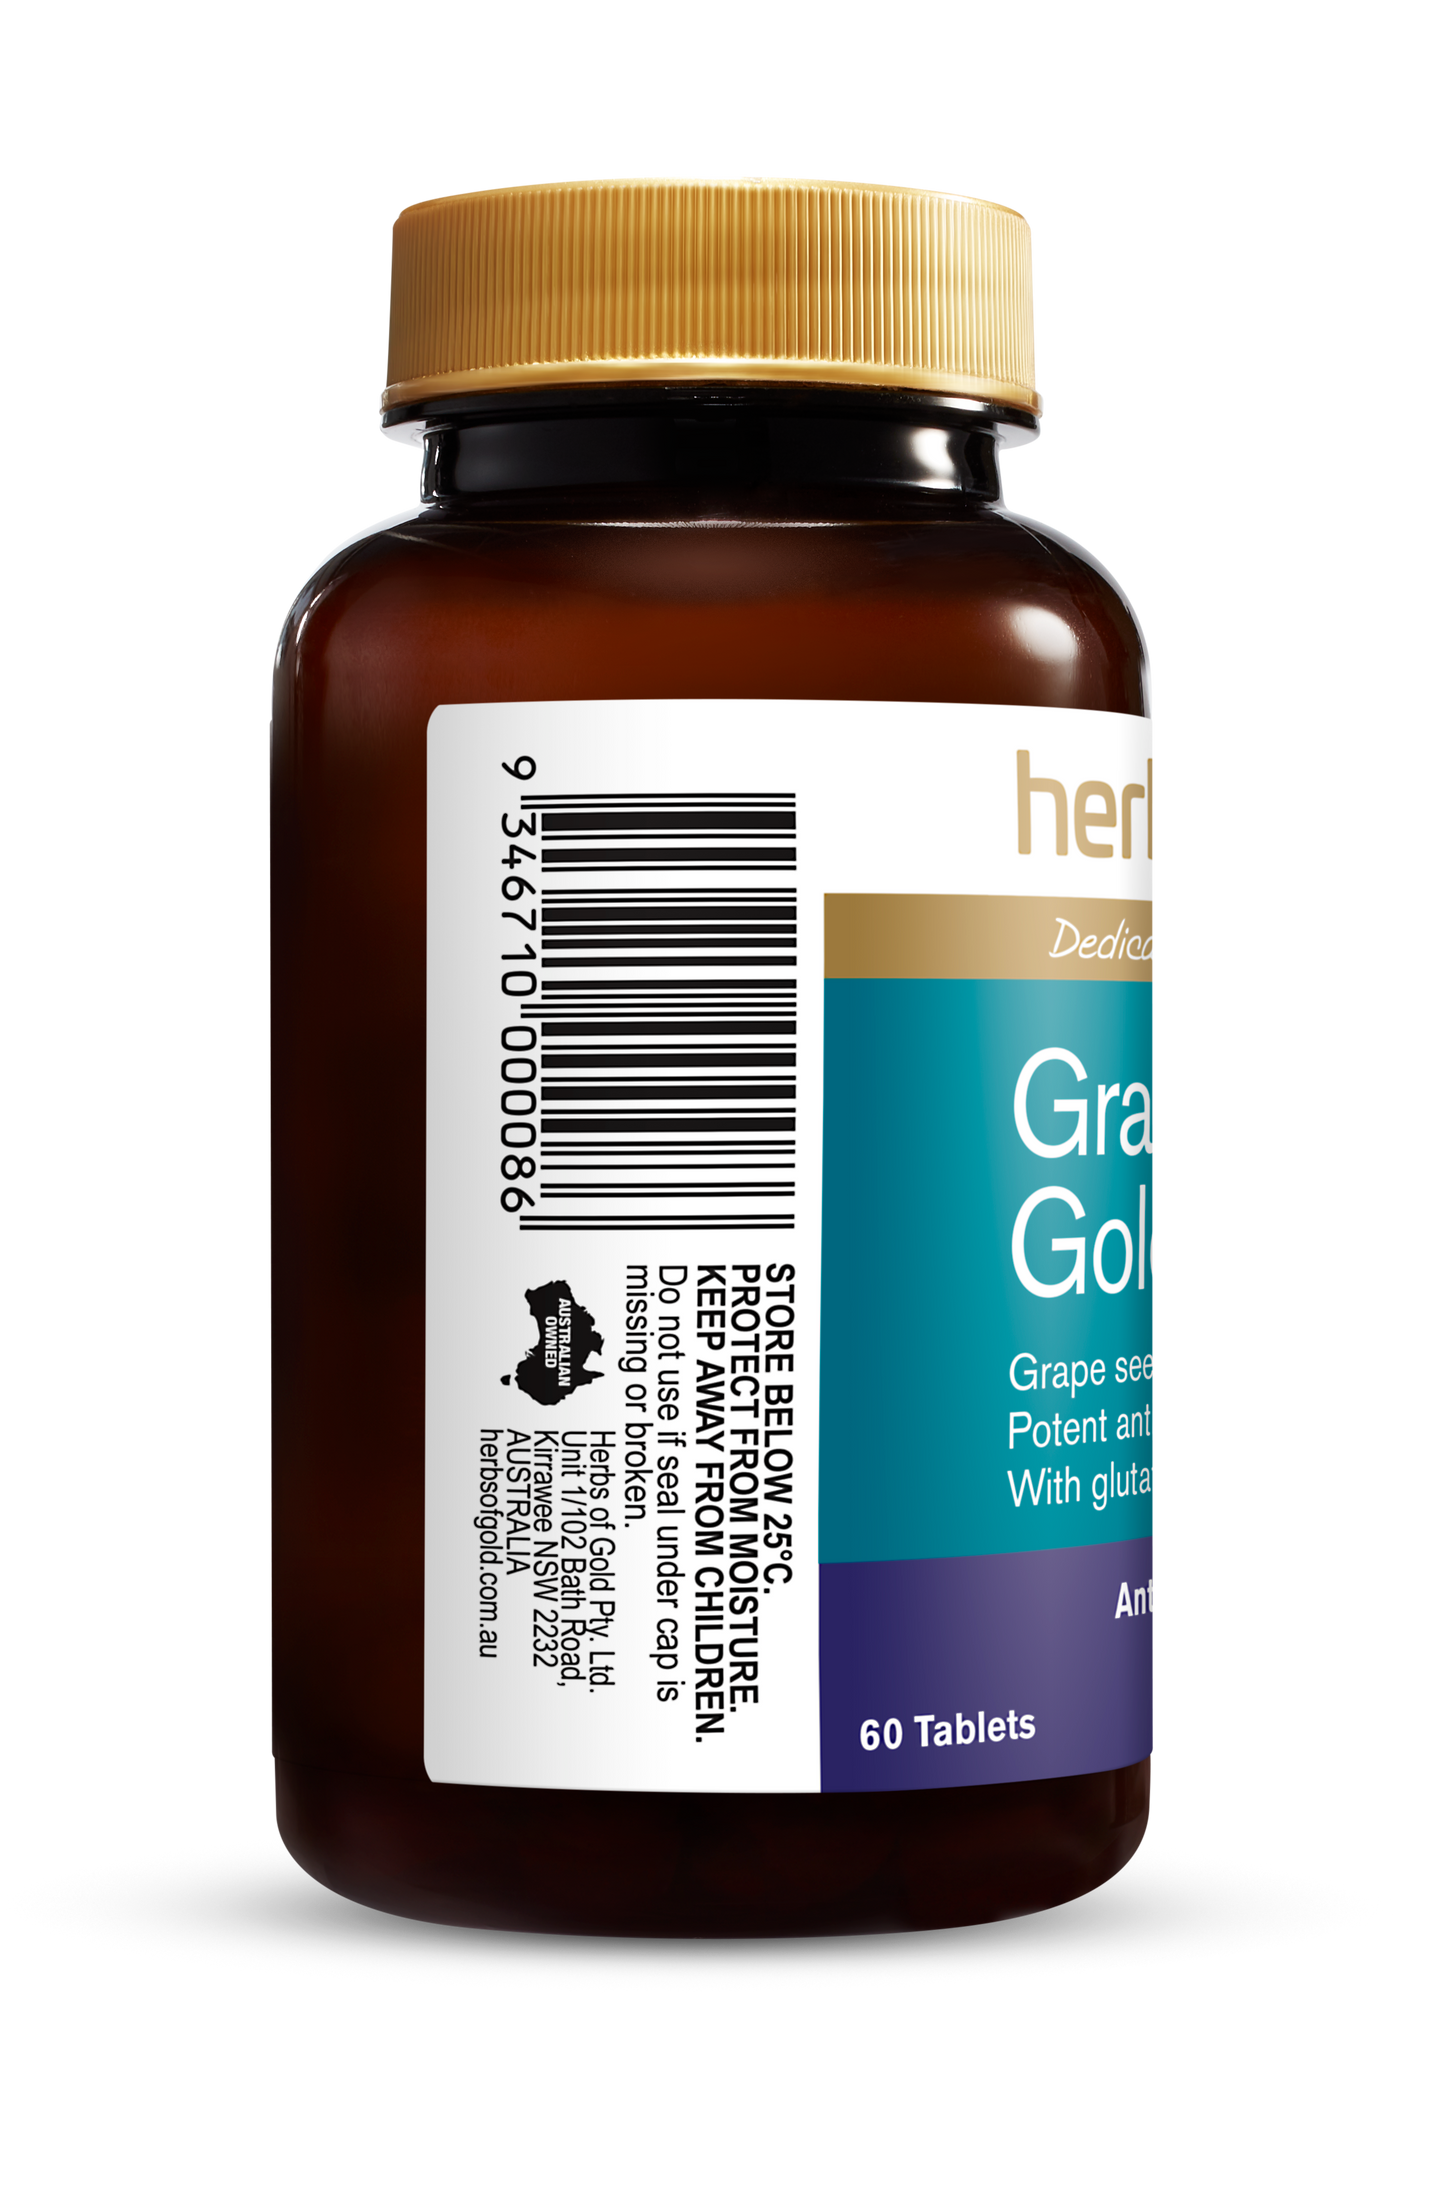 Herbs Of Gold Grape Seed Gold